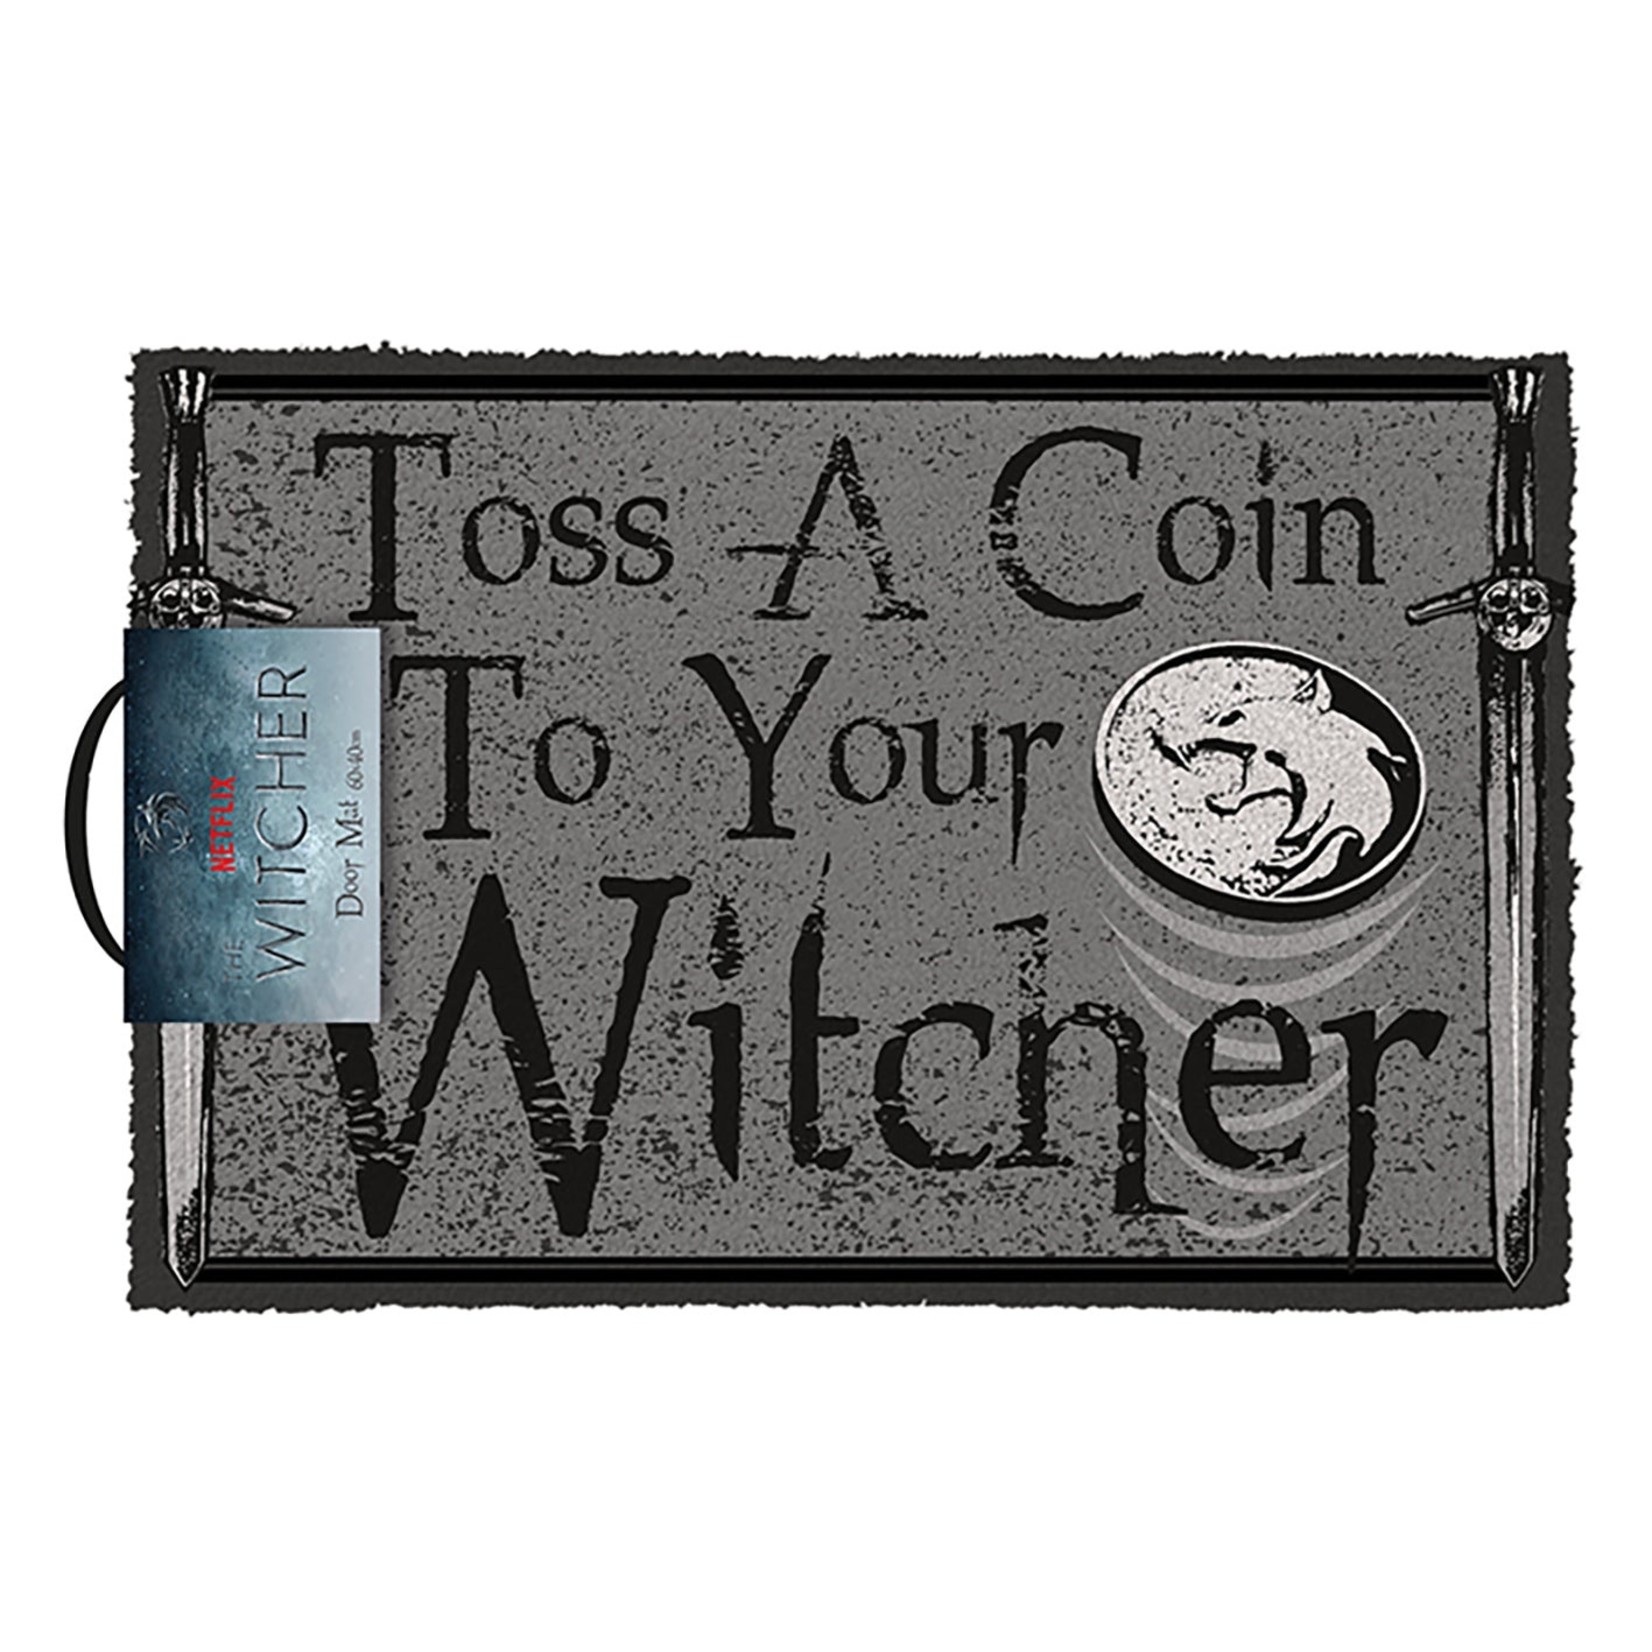 Pyramid Pyramid The Witcher Toss a Coin to Your Witcher Doormat